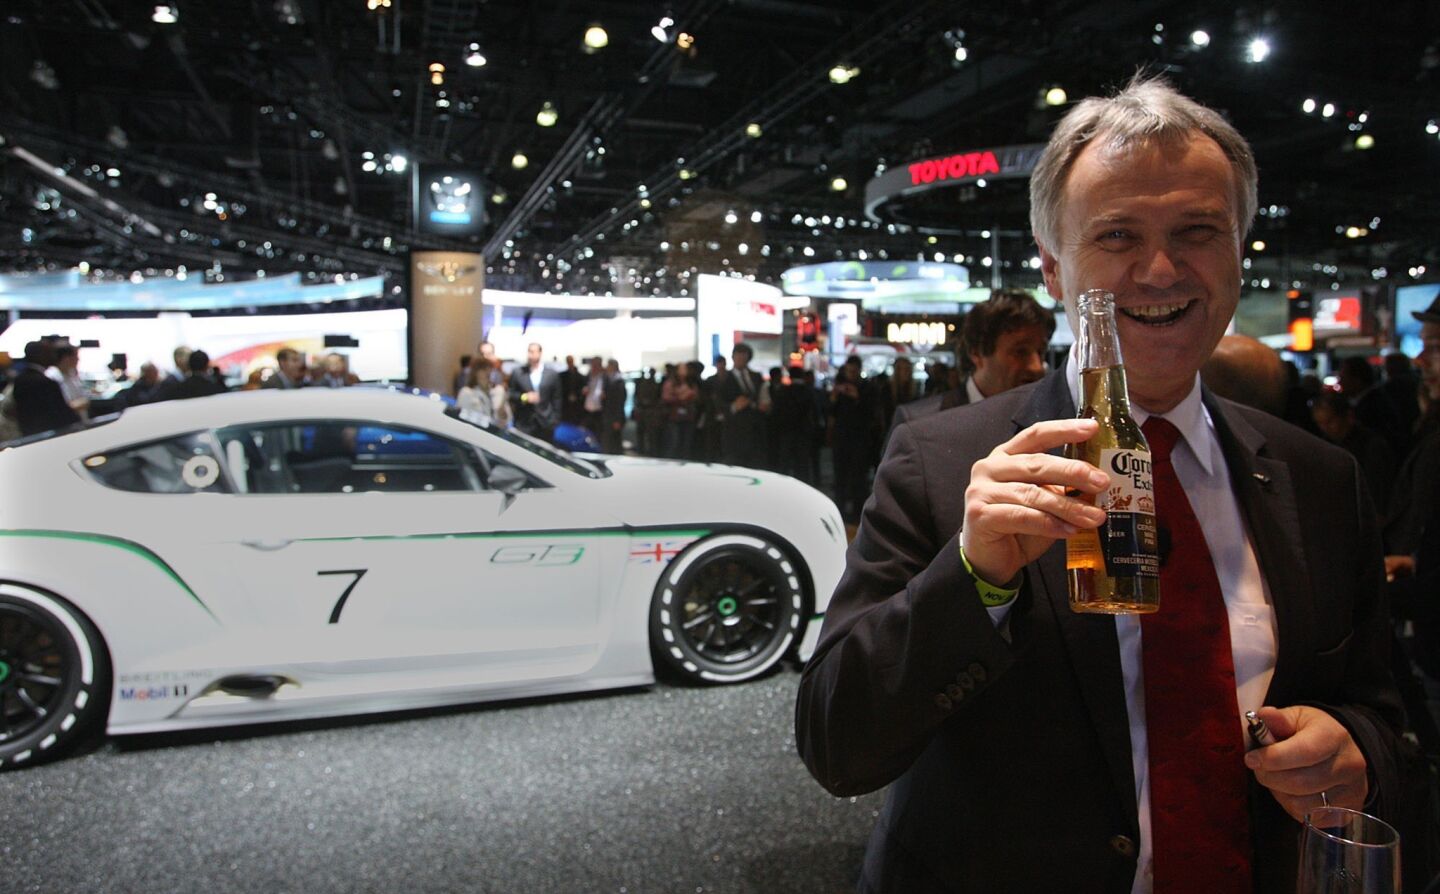 Rolf Frech, a member of Bentley's engineering board, enjoys a beer at the L.A. Auto Show. Behind him is the Bentley Continental GT3 concept race car, making its U.S. debut. It's the luxury car maker's fastest-ever road car.